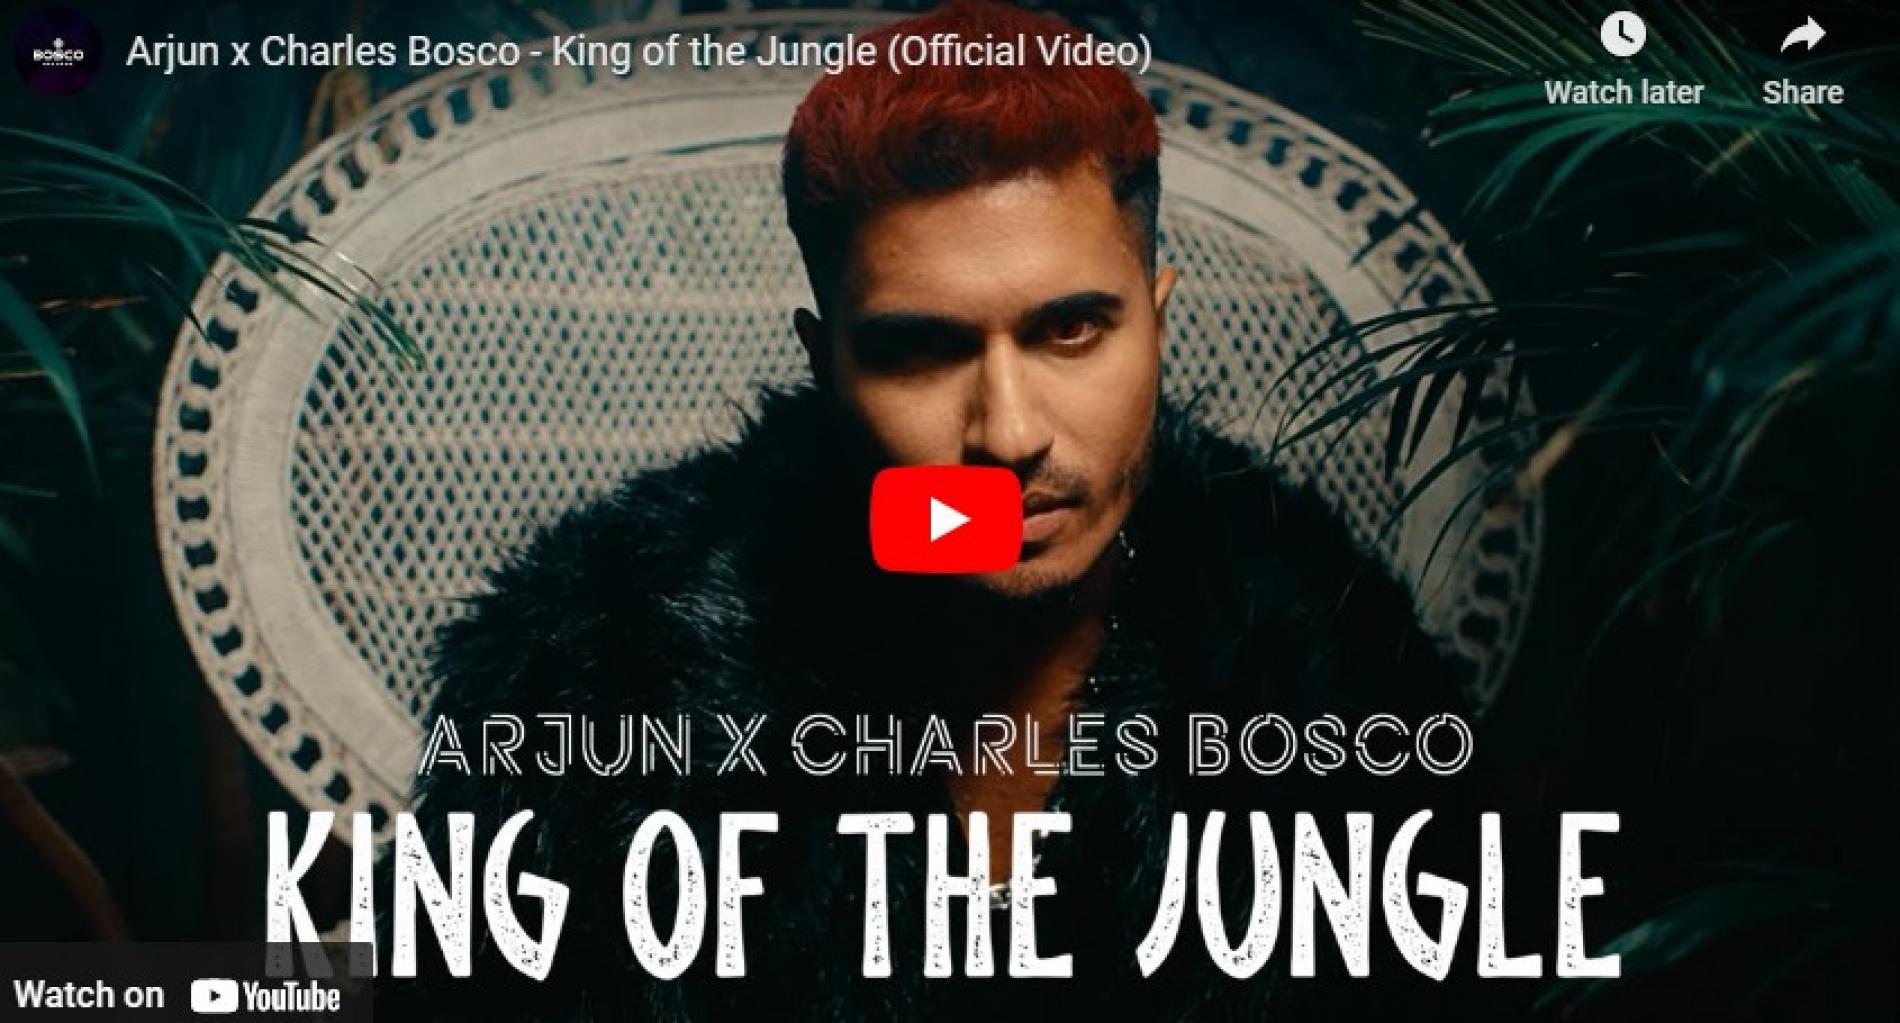 New Music : Arjun x Charles Bosco – King of the Jungle (Official Video)